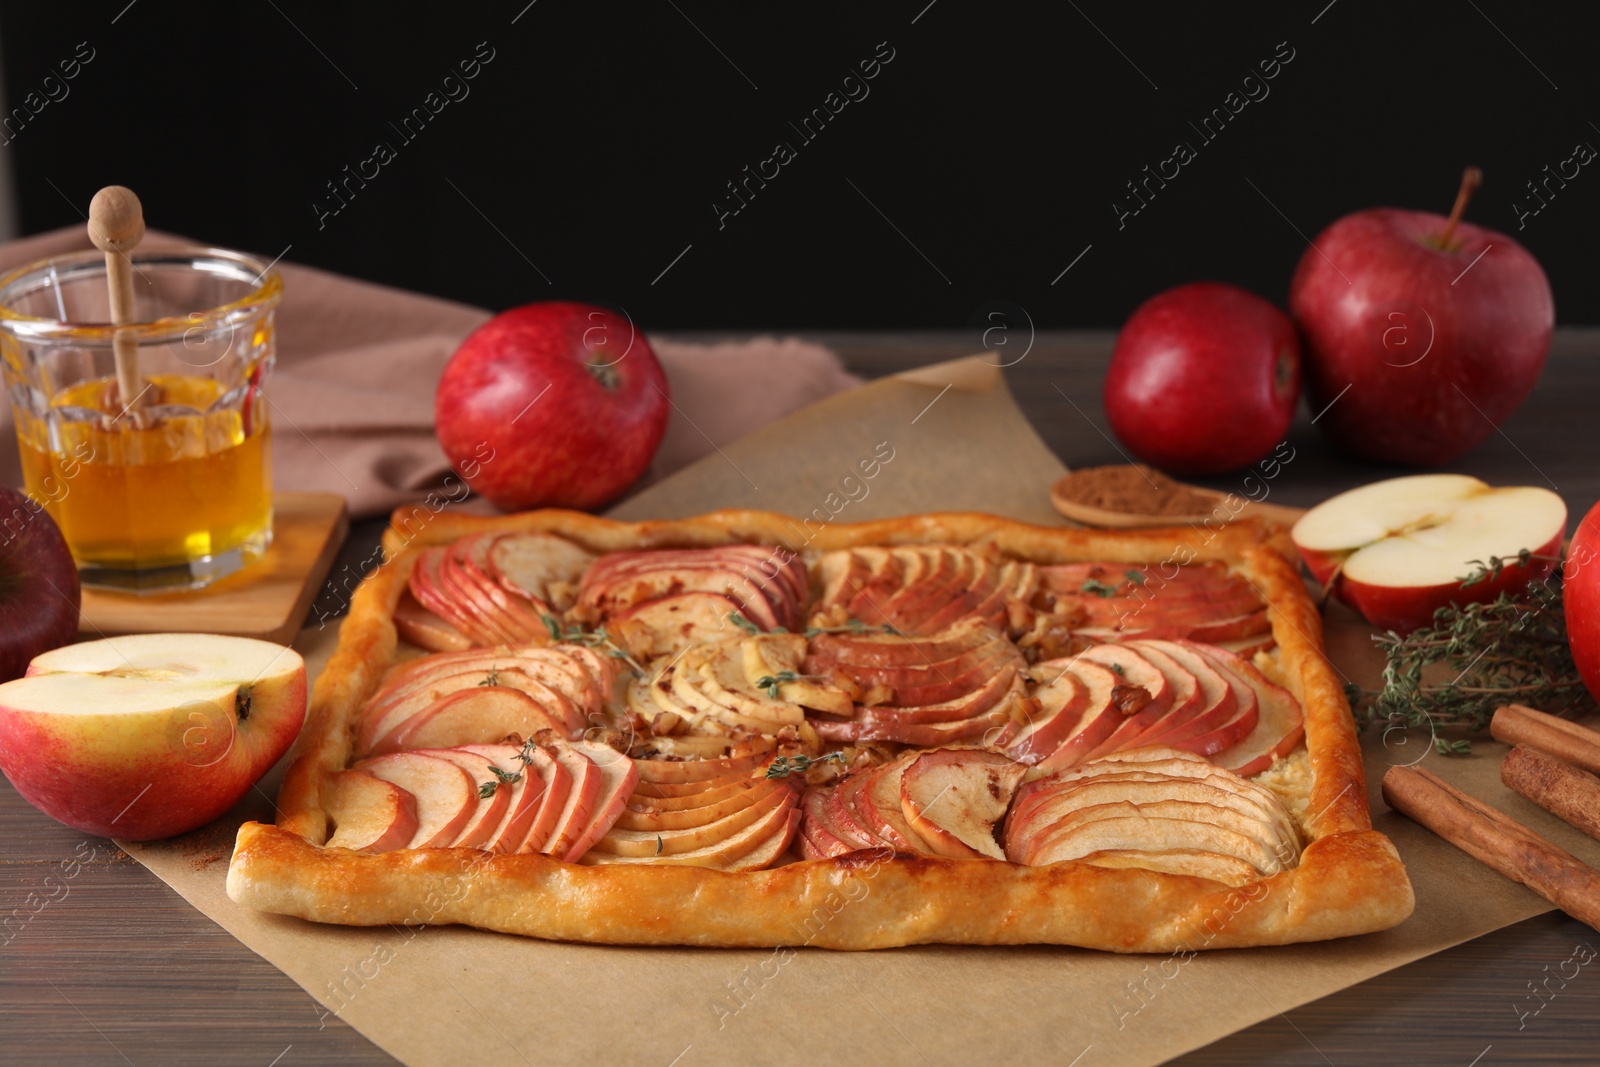 Photo of Freshly baked apple pie and ingredients on wooden table